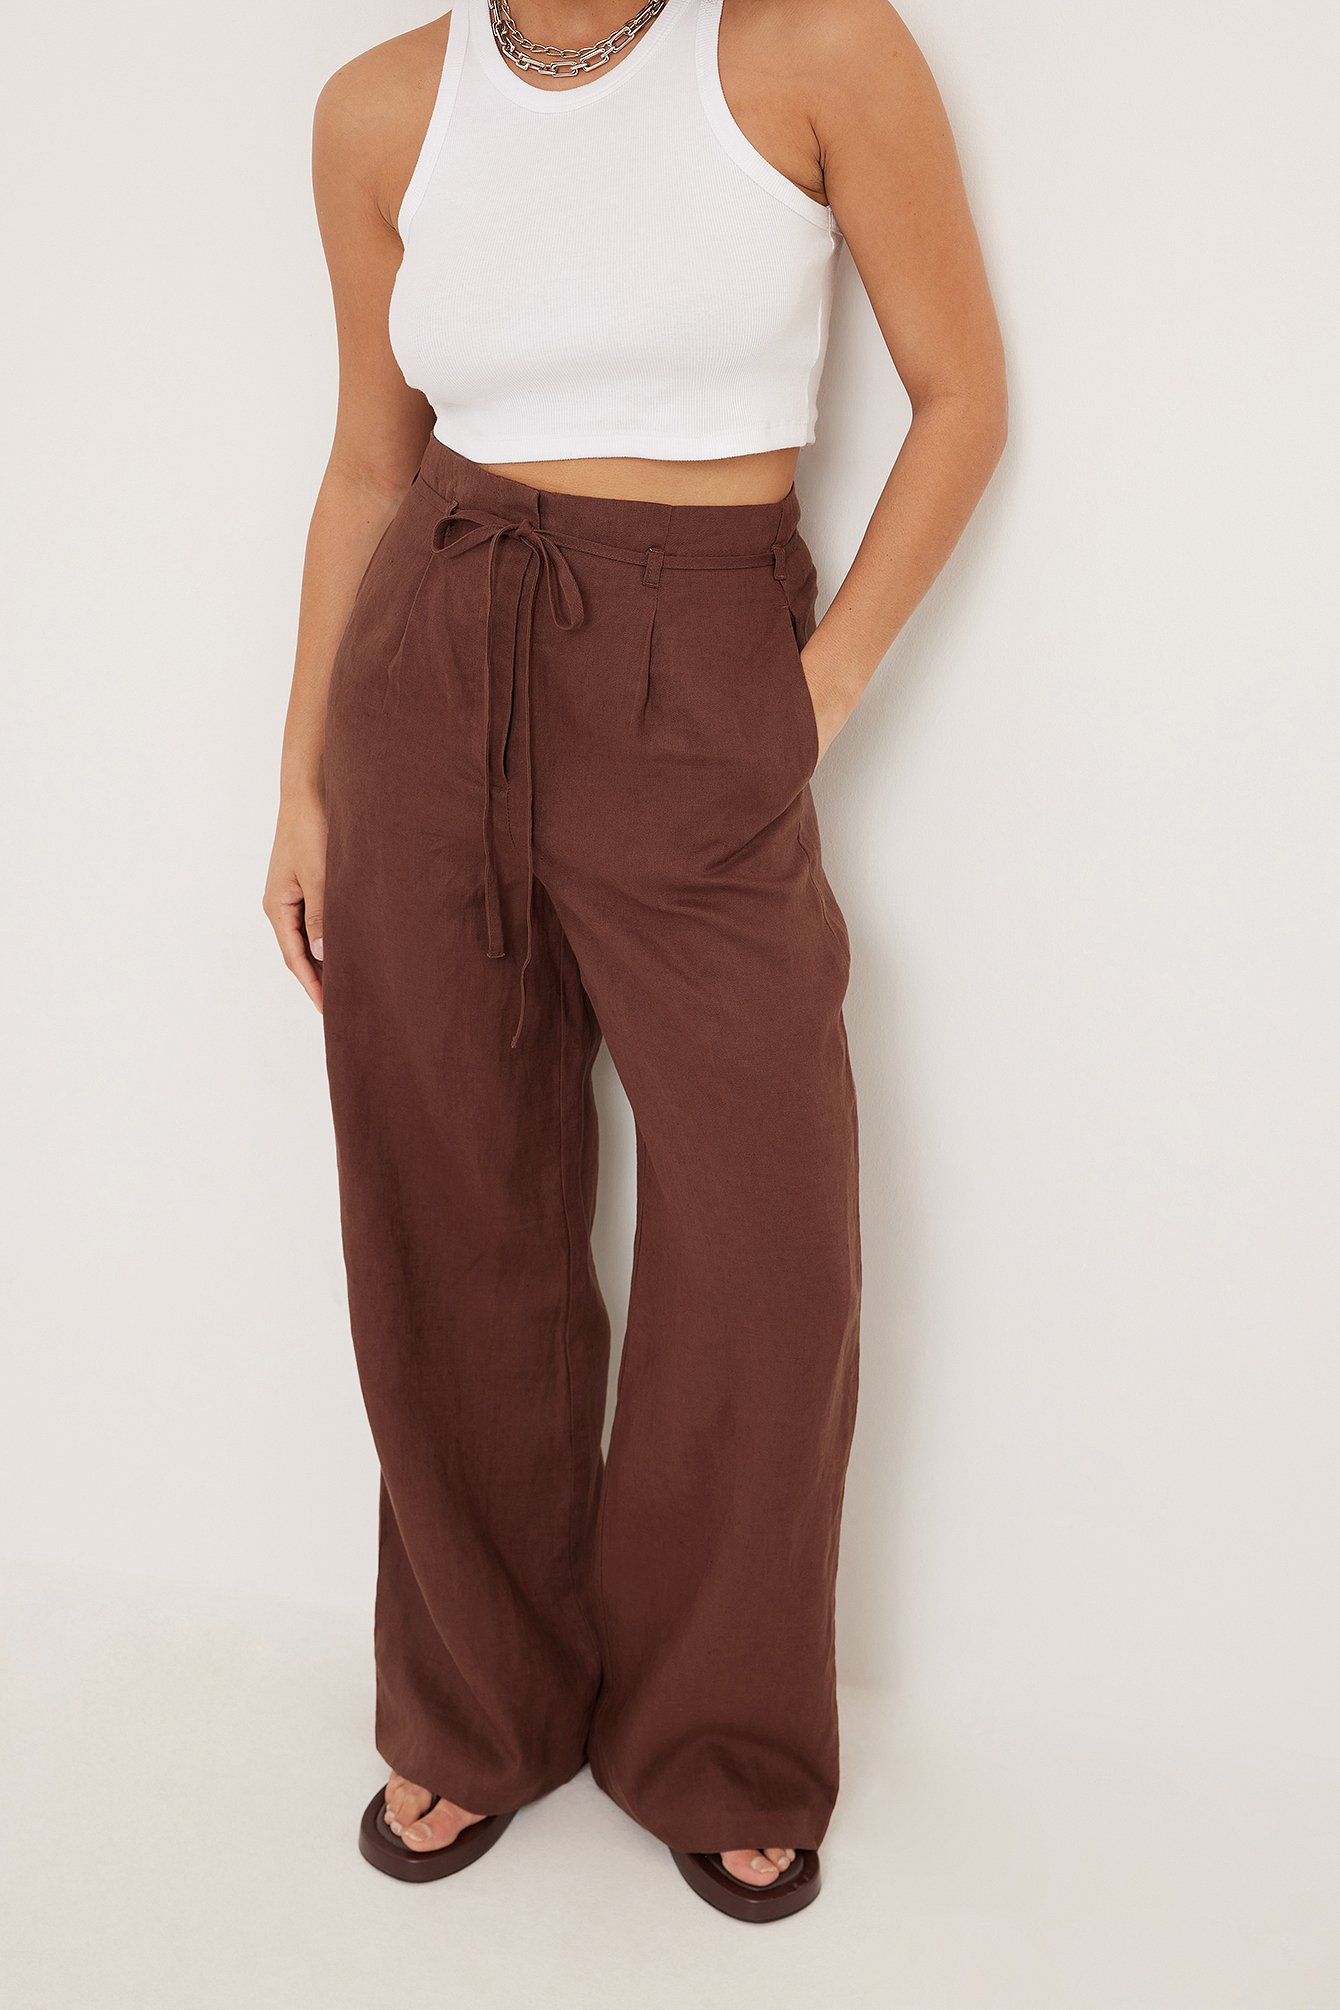 Buy Womens Straight Fit Linen Pants  Brown Online at the Best Price in  India  Loopify